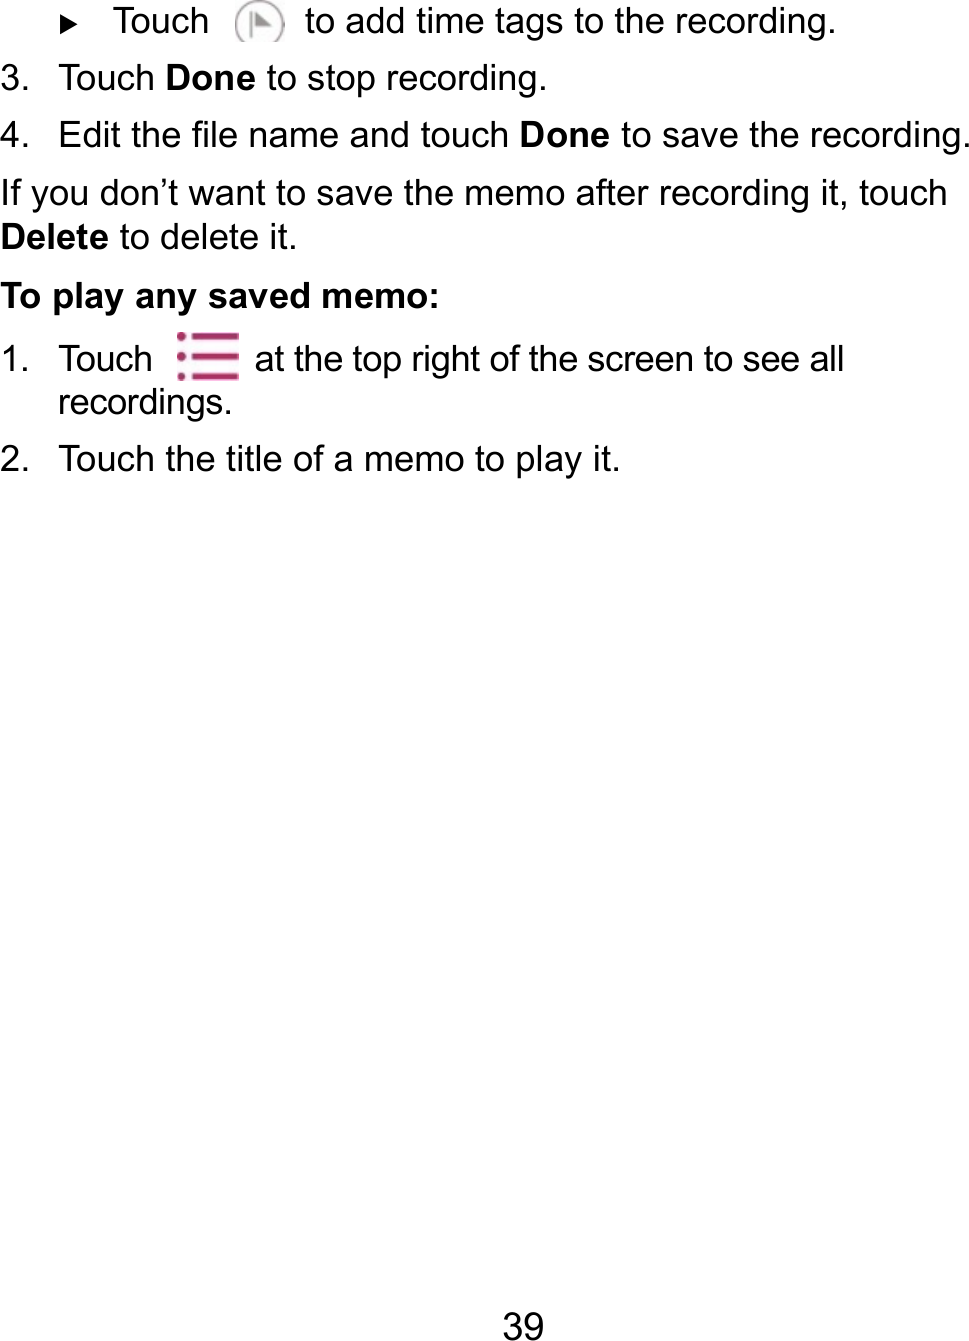  39  Touch    to add time tags to the recording. 3. Touch Done to stop recording.   4.  Edit the file name and touch Done to save the recording. If you don’t want to save the memo after recording it, touch Delete to delete it. To play any saved memo: 1.  Touch    at the top right of the screen to see all recordings. 2.  Touch the title of a memo to play it. 